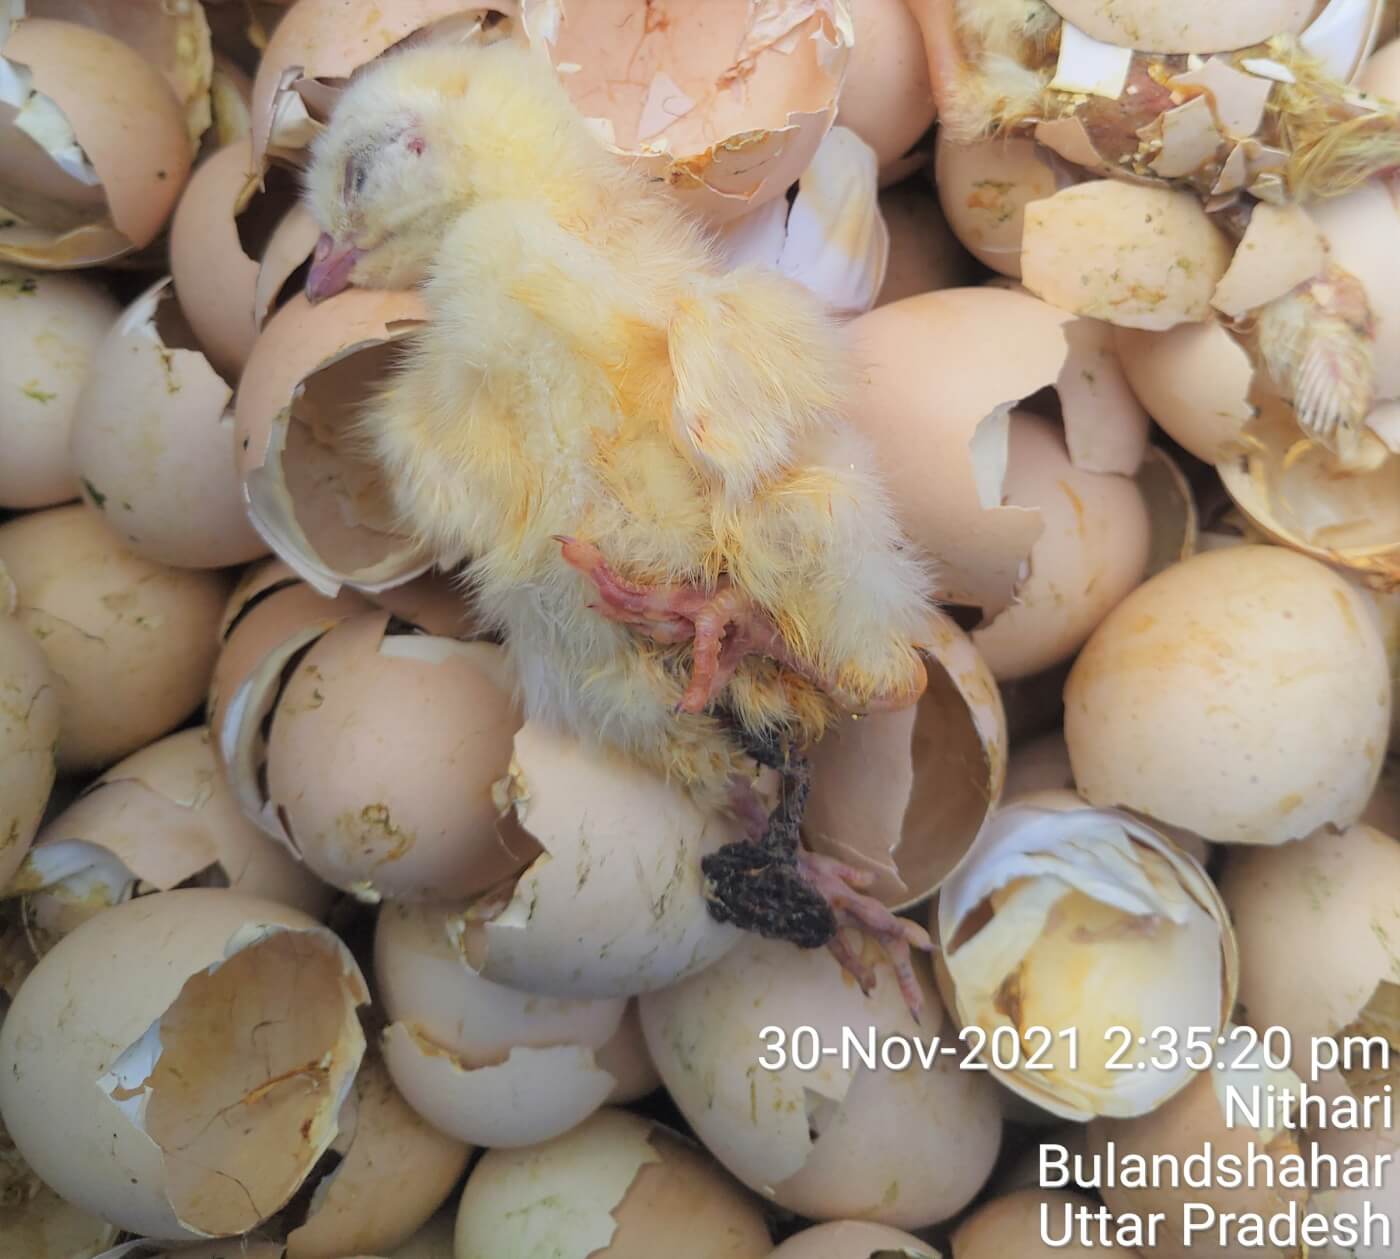 New Investigation Shows How the Egg and Meat Industry Cruelly Kills Chicks